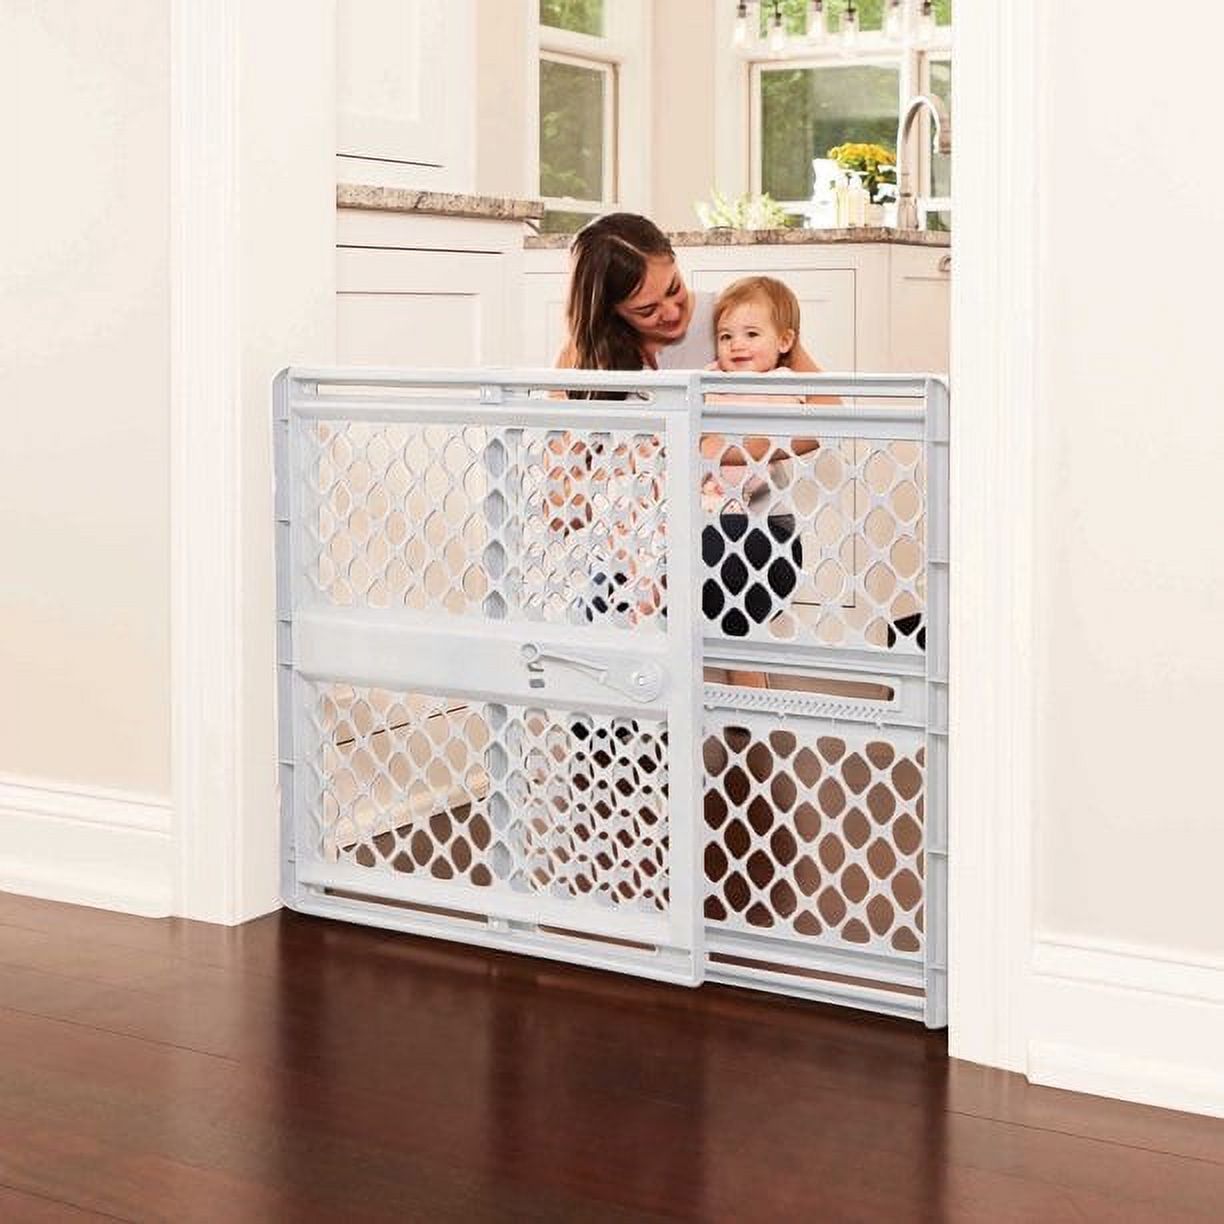 Toddleroo by North States Supergate Explorer Baby Gate - 26 to 42 inches wide and stands 26 inches tall - image 4 of 10